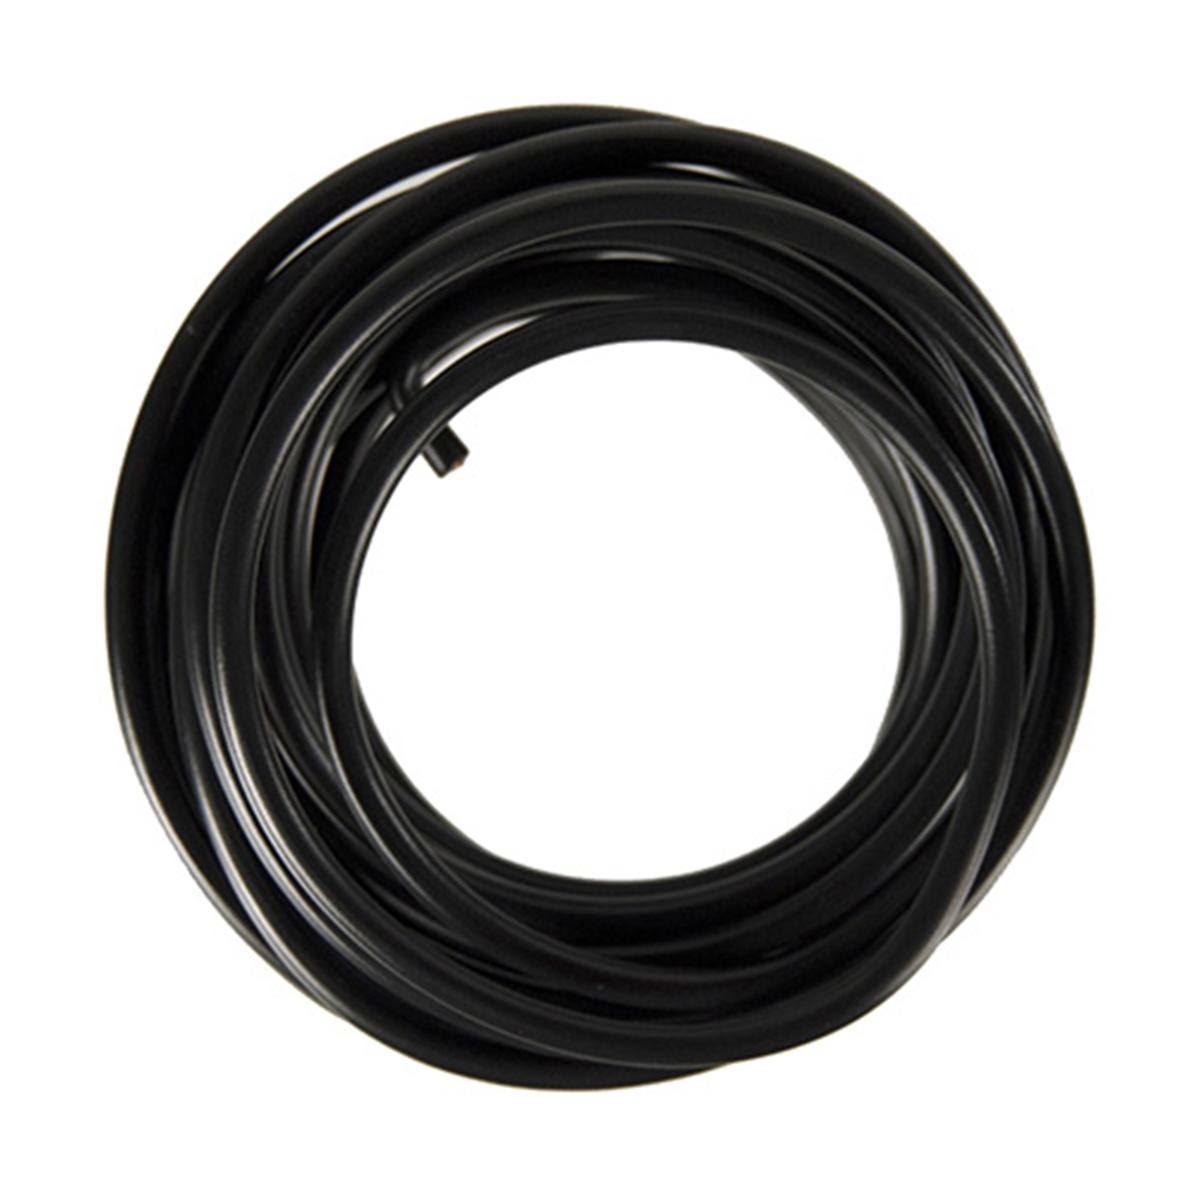 Jt and T Products 100F Primary Wire - 80c, 10 Awg, Black 8